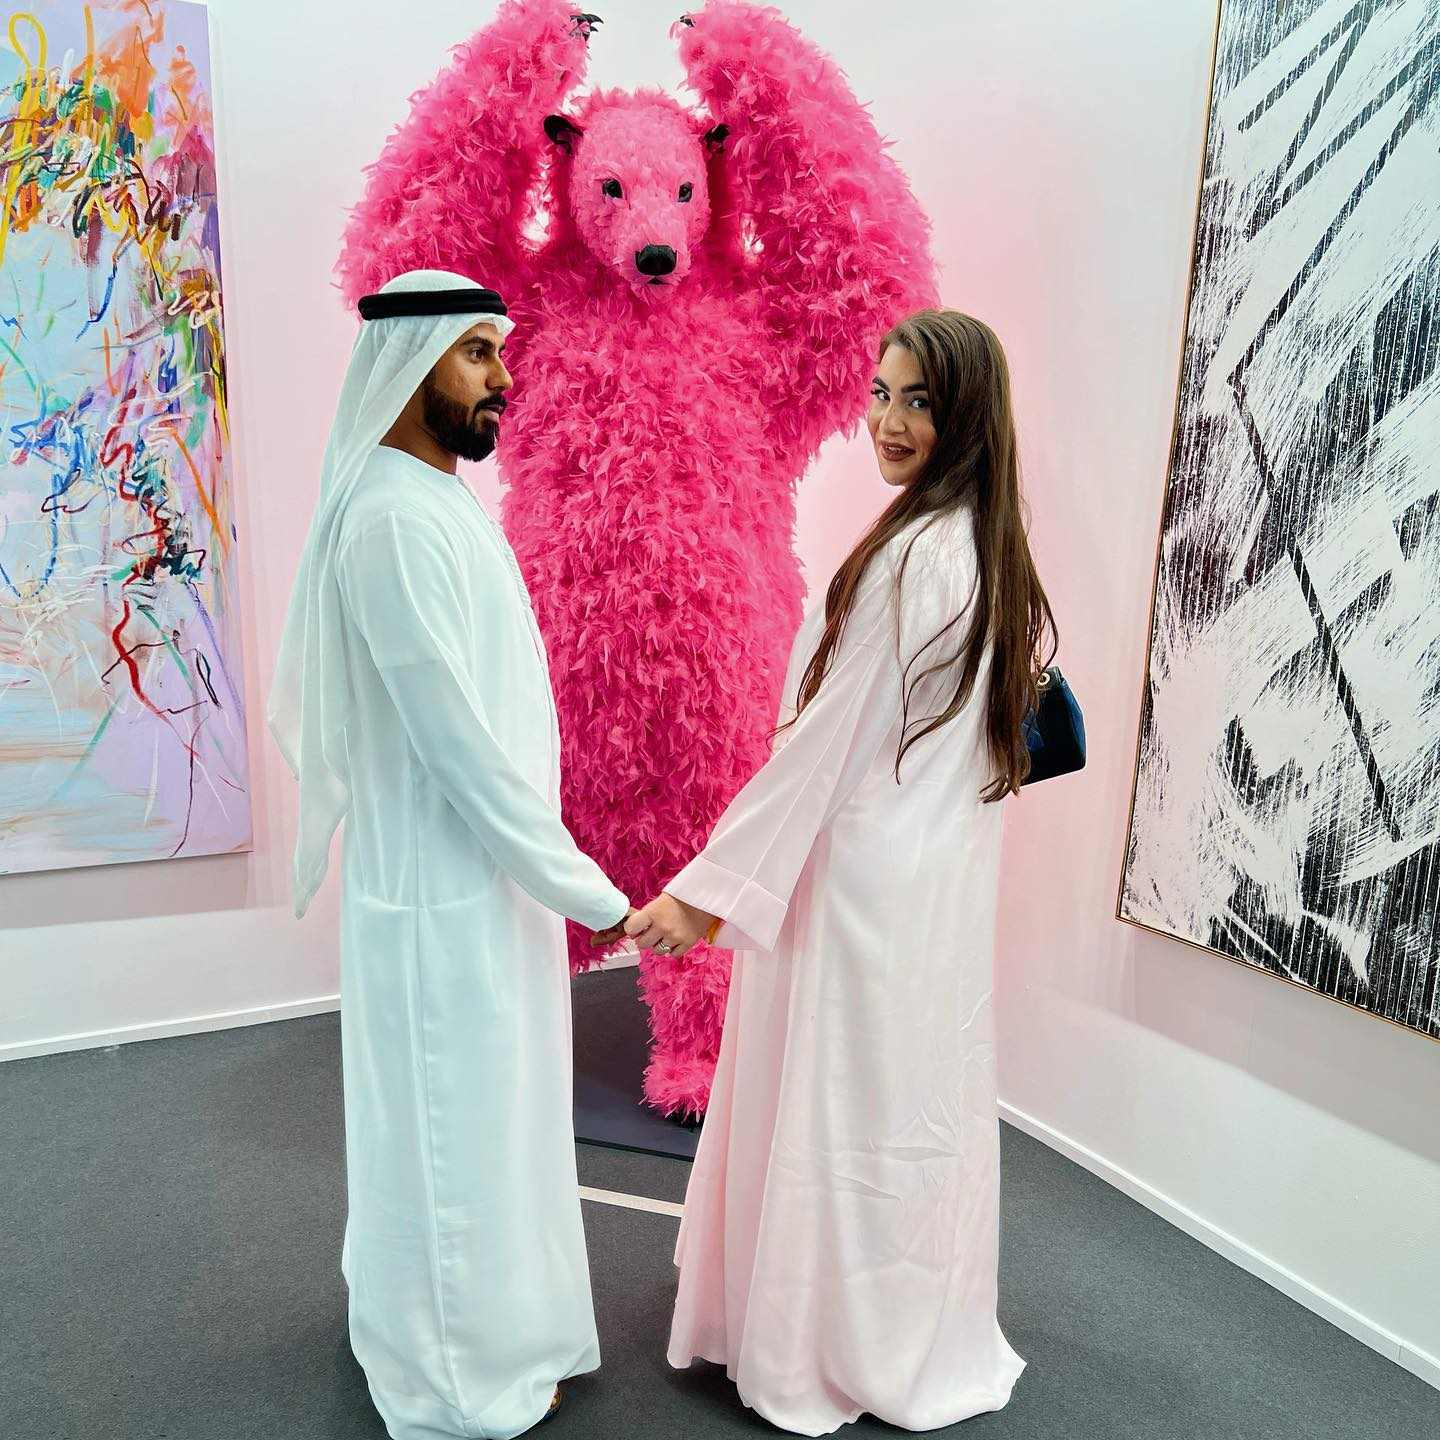 According to the Dubai-based influencer, her hubby wants to get her pregnant 'every five minutes'